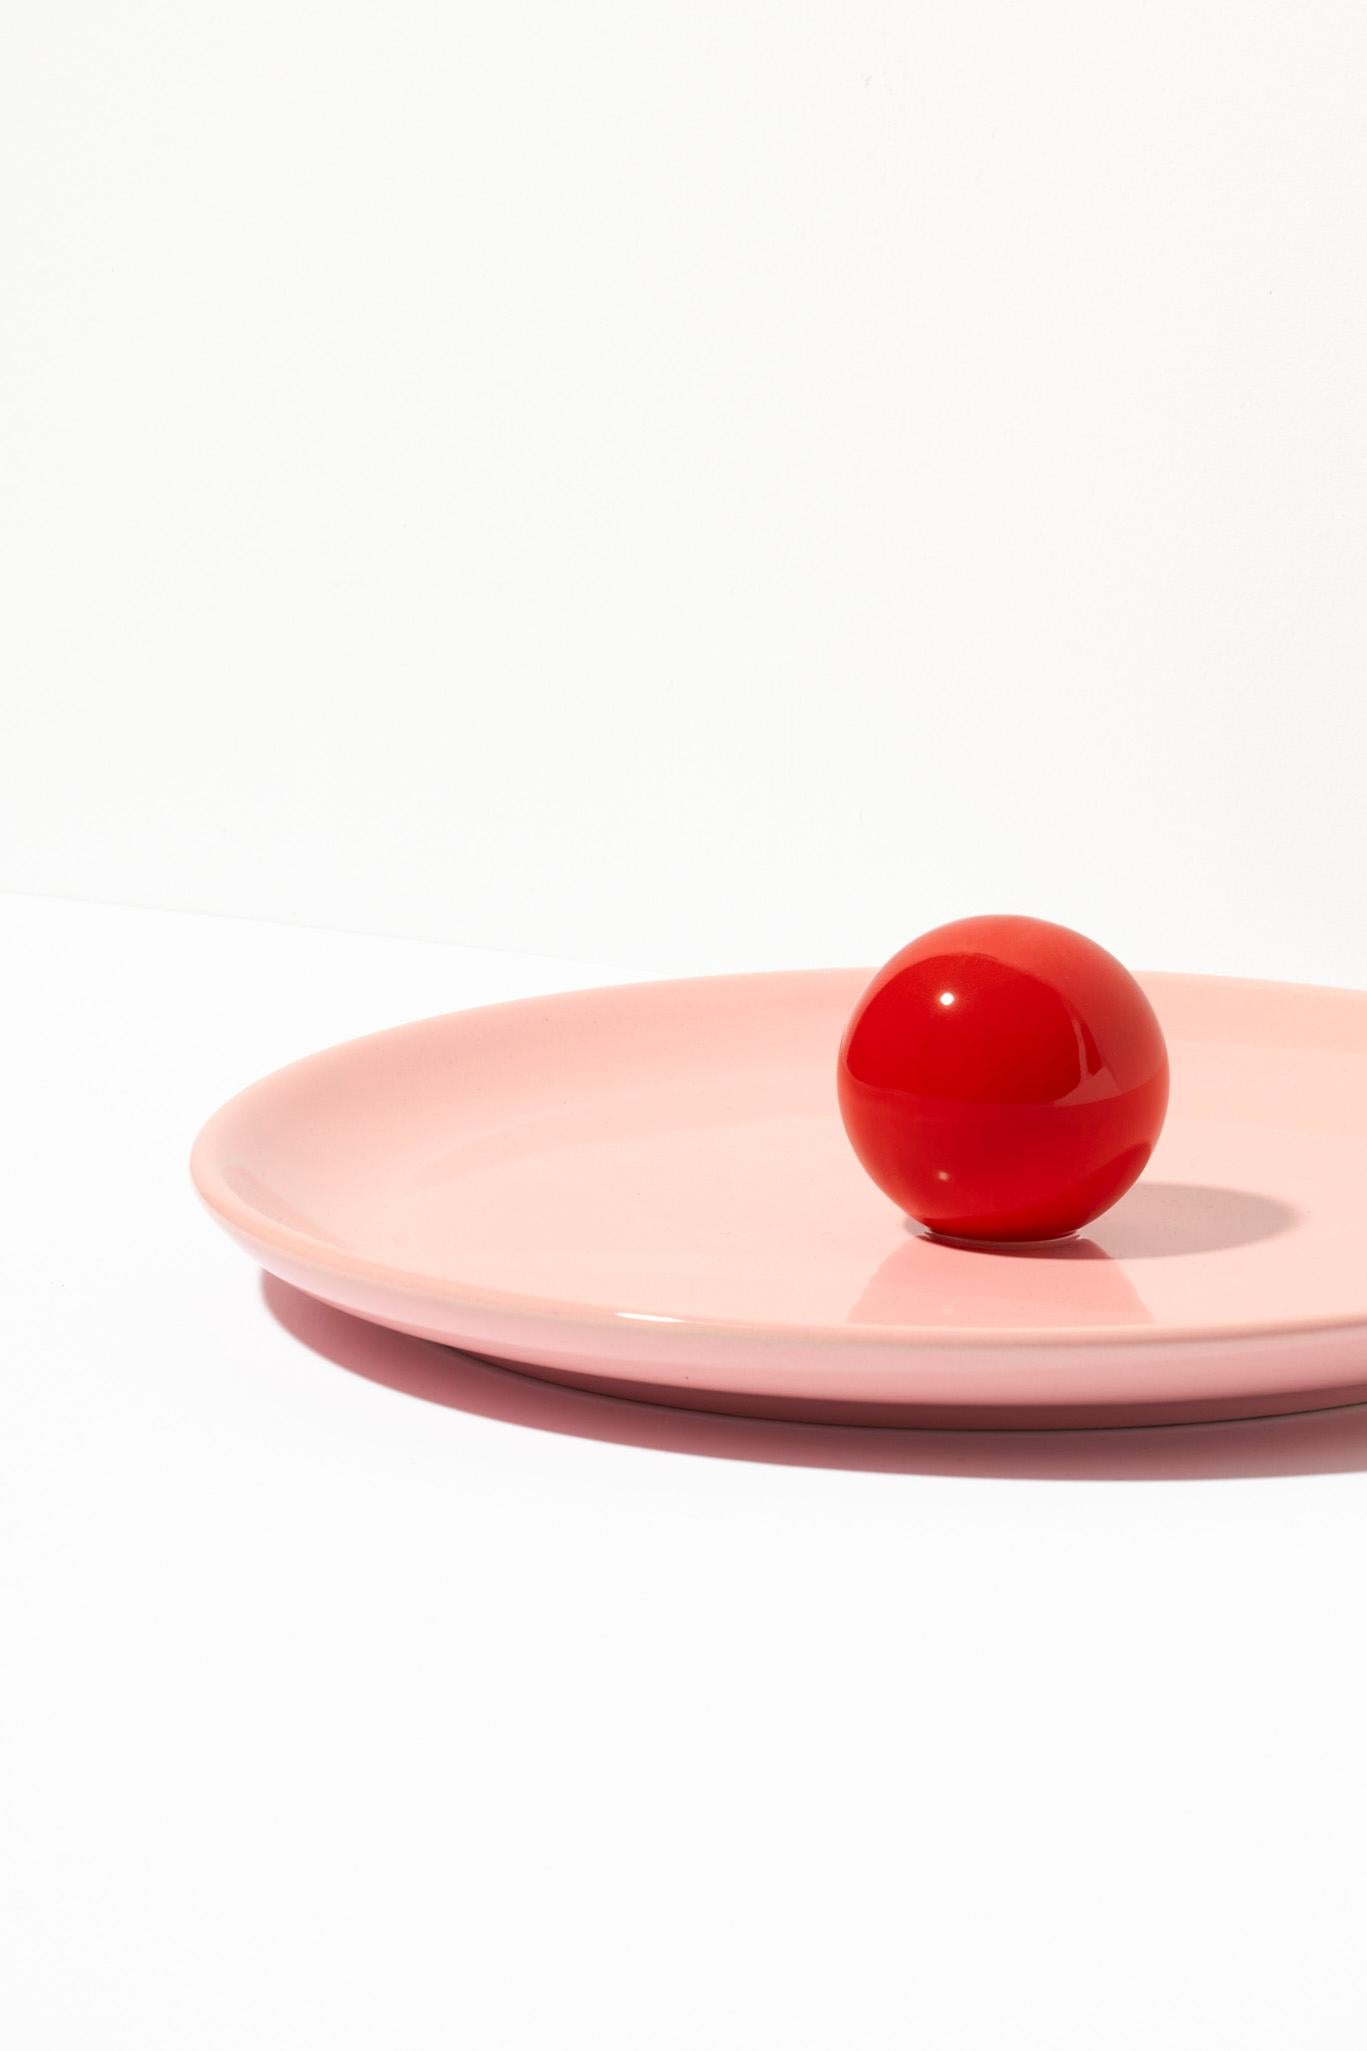 Modern Aniela Platter / Circus / Candy / Red by Malwina Konopacka For Sale